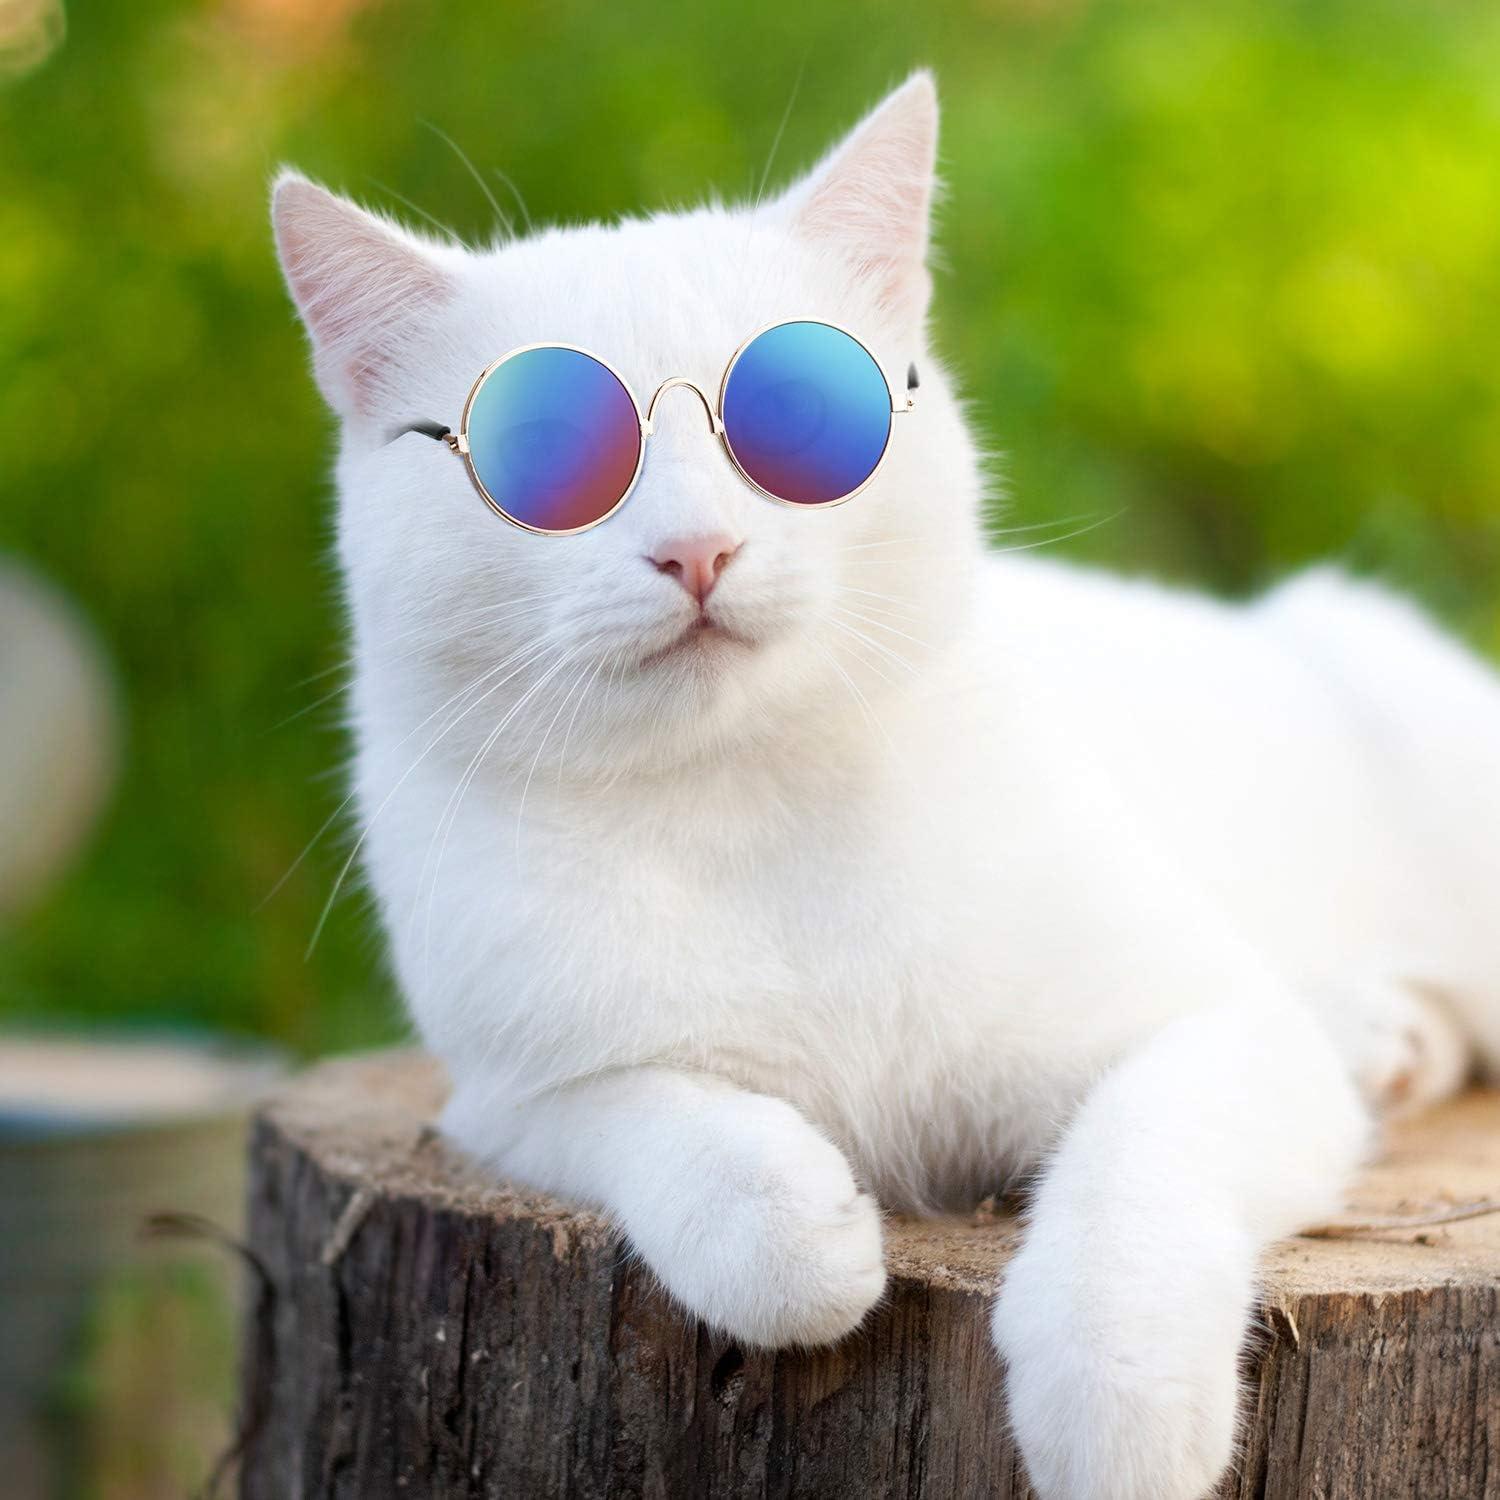 Aggregate more than 161 cat with sunglasses latest